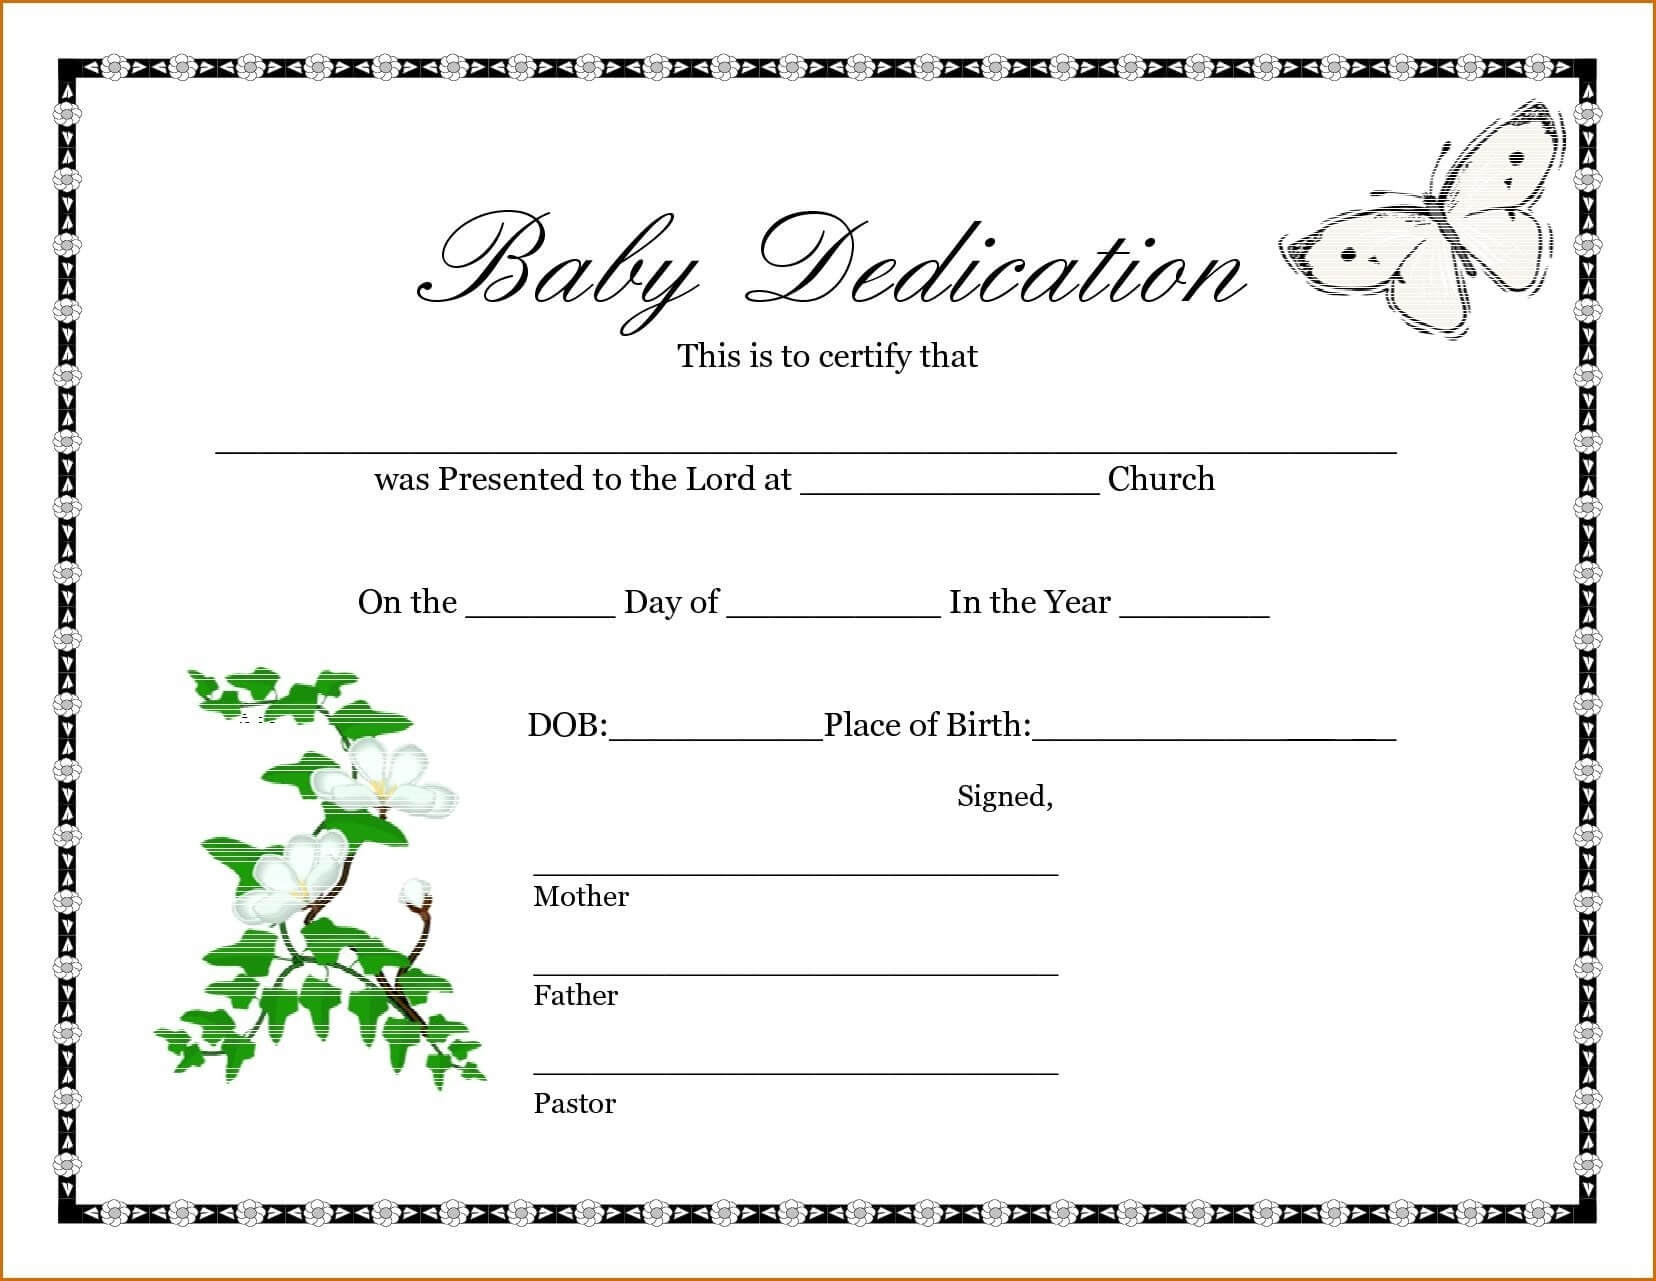 A Birth Certificate Template | Safebest.xyz For Editable Birth Certificate Template